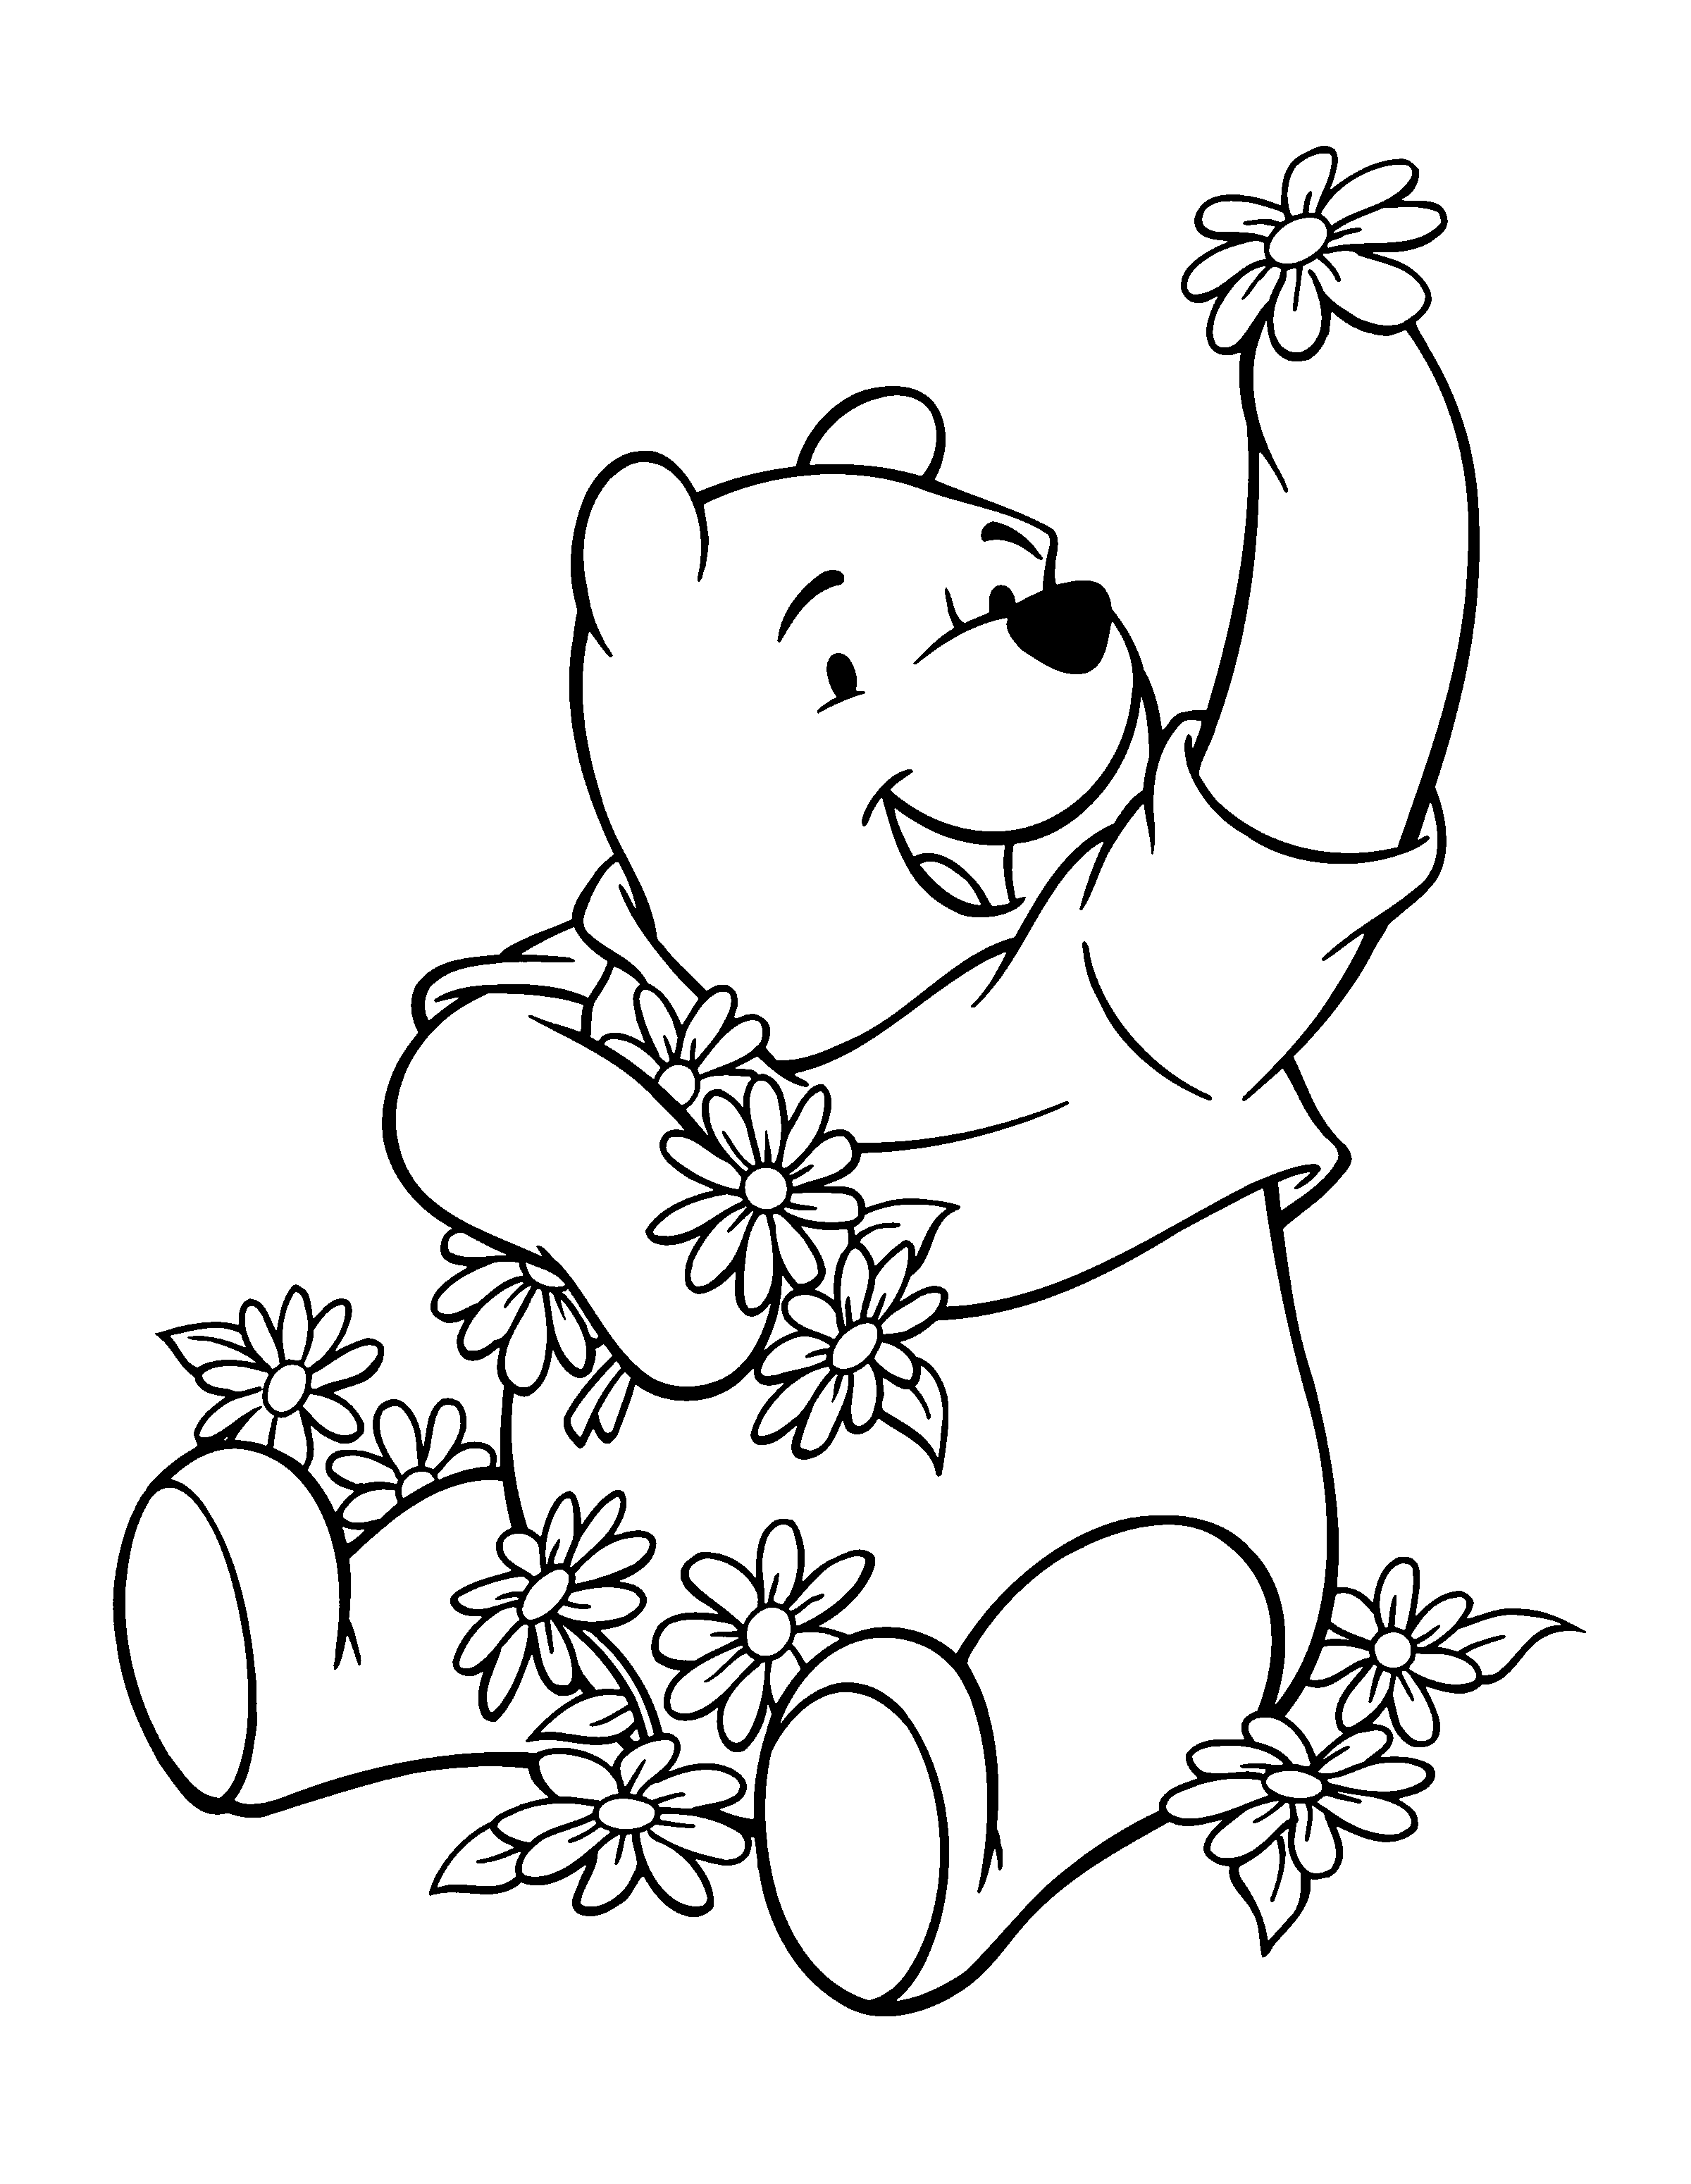  Baby Winnie The Pooh And Friends Coloring Pages 10